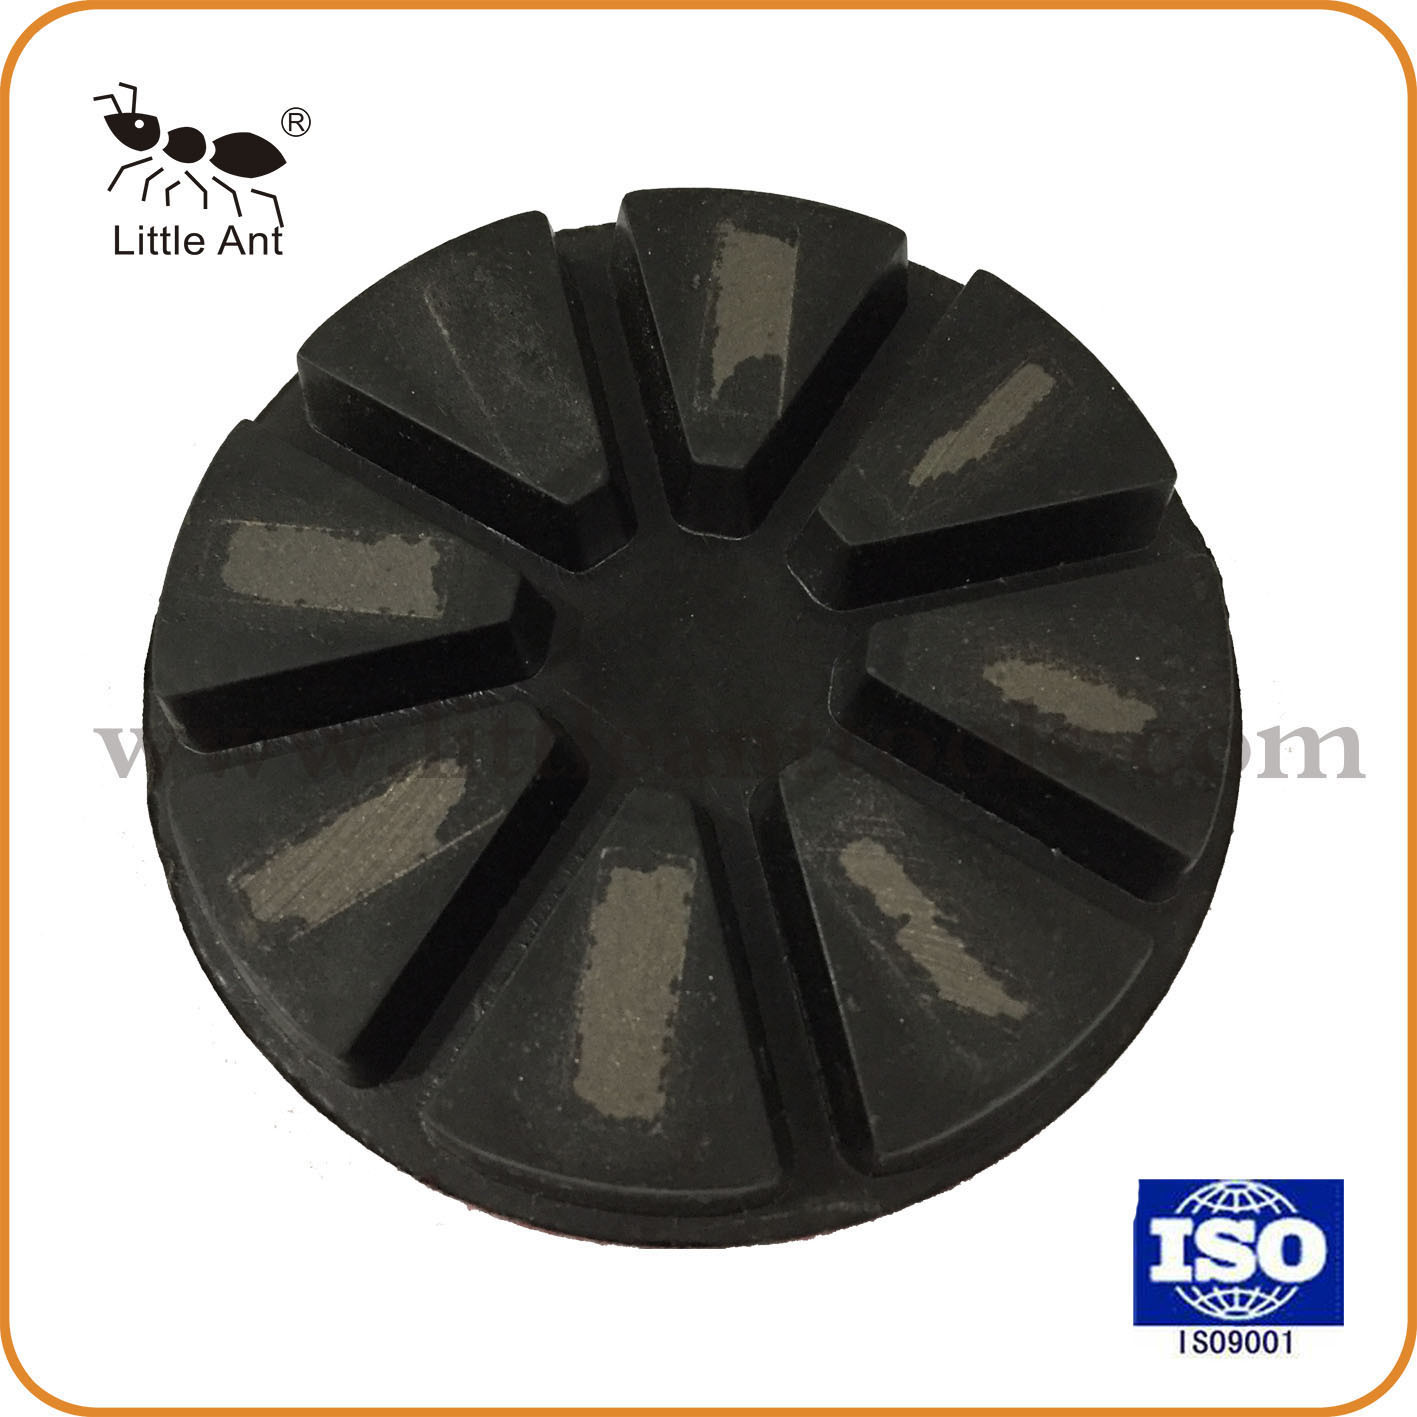 10 mm Thickness Metal with Resin Polishing Pad, Professional Stone Polishing Tool, Abrasive Tool for Concrete, Floor.